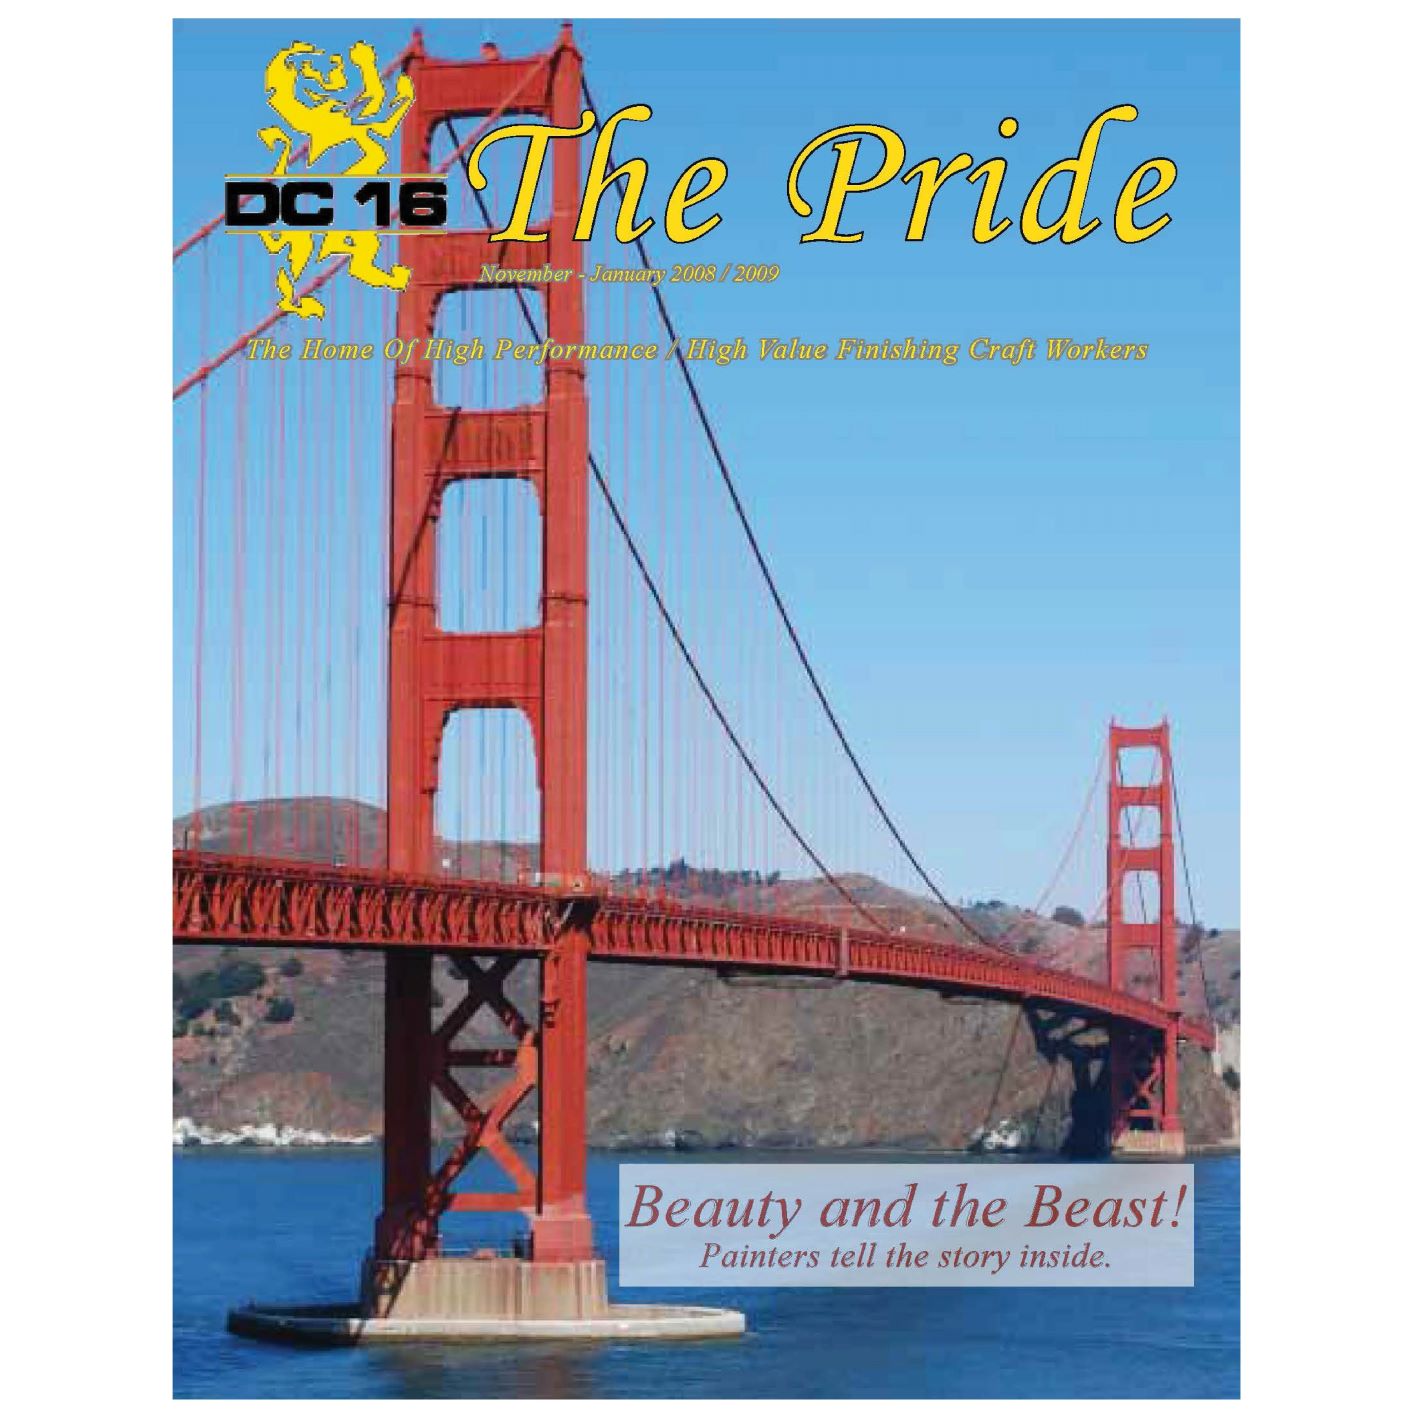 Image from the Gallery: The Pride November 2008 – January 2009